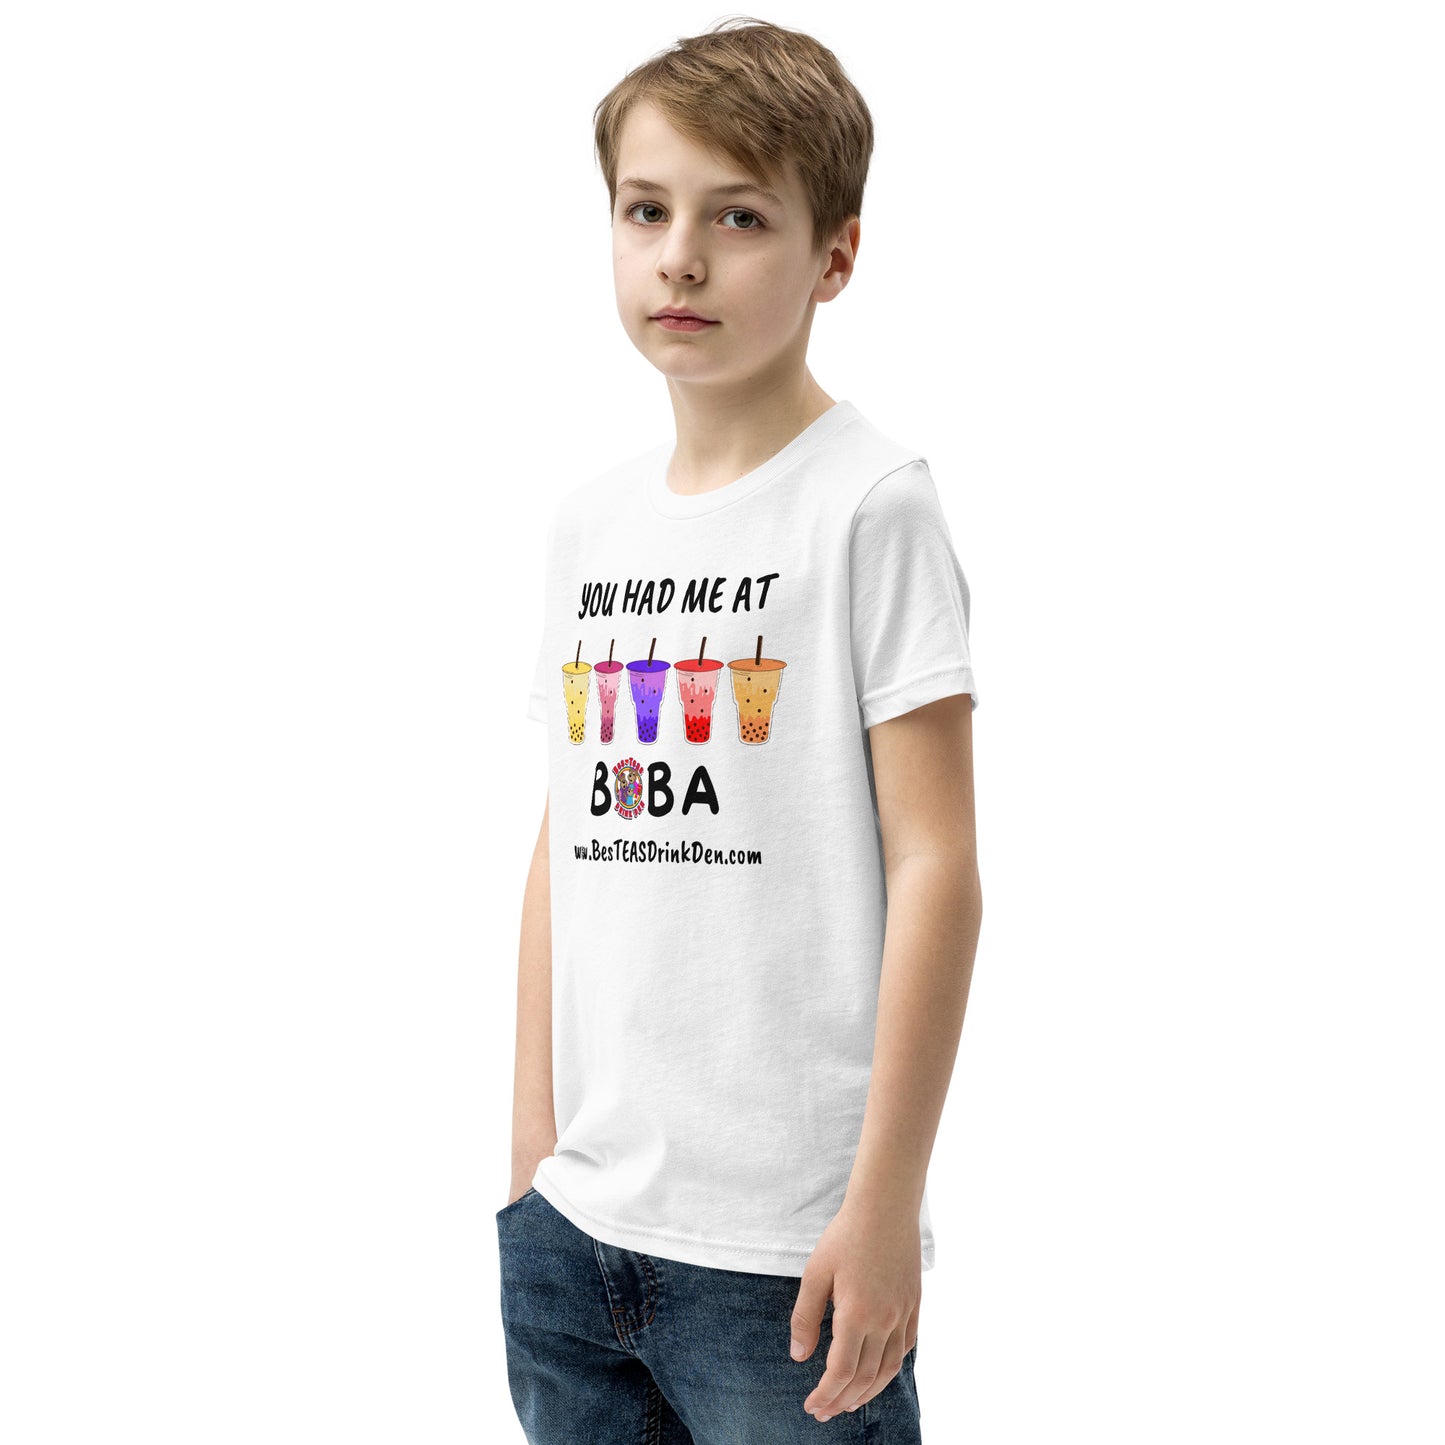 "You Had Me At Boba" BesTEAS Youth T-Shirt